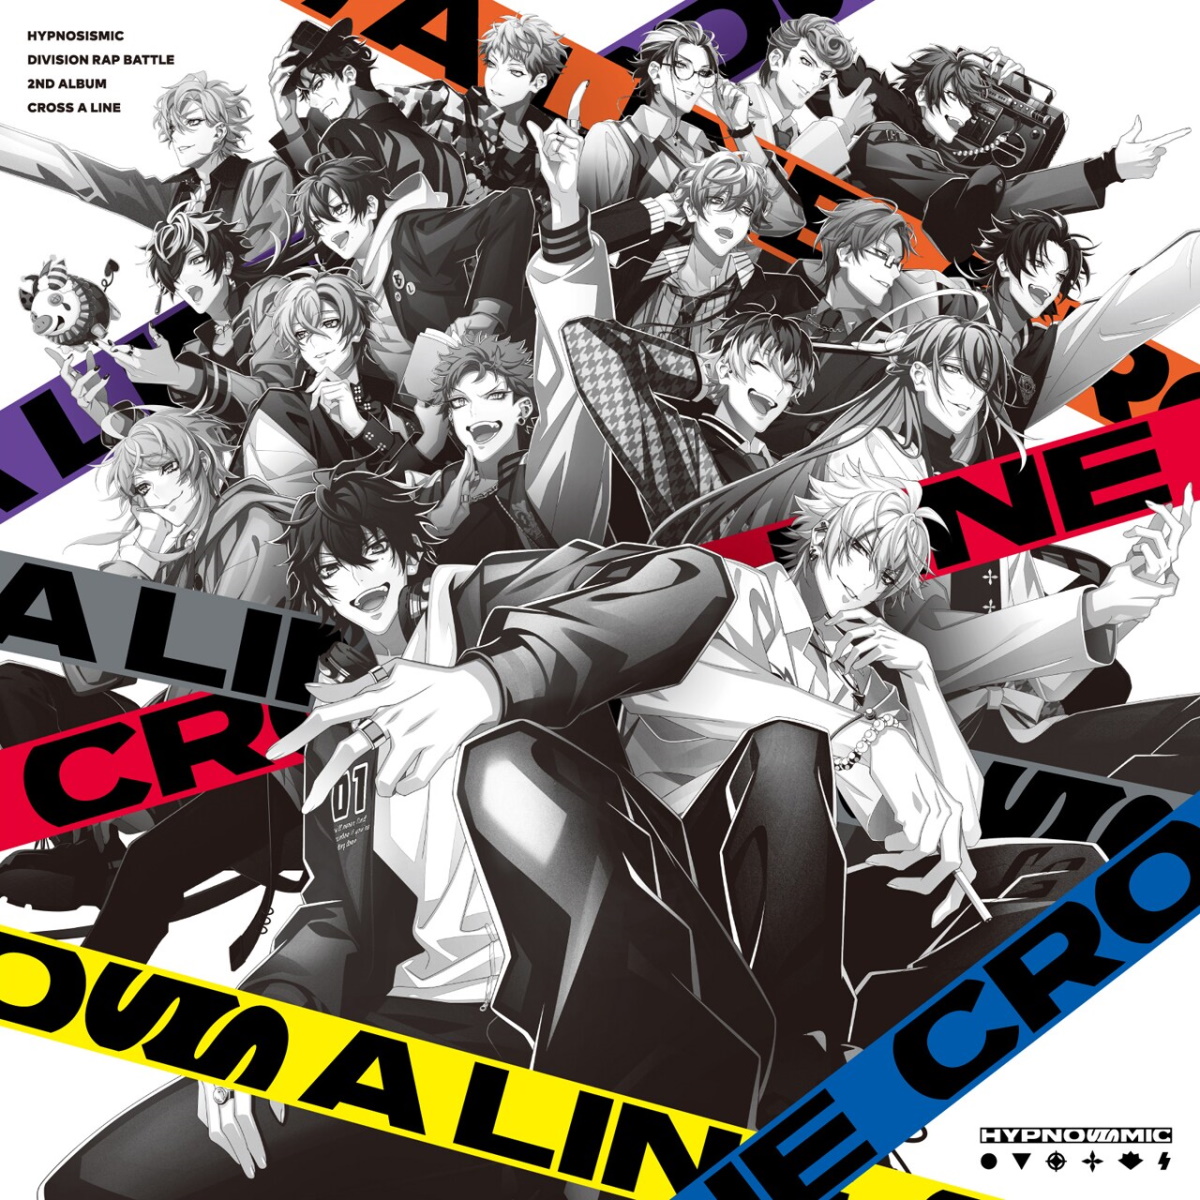 Cover art for『Division All Stars - CROSS A LINE』from the release『CROSS A LINE』